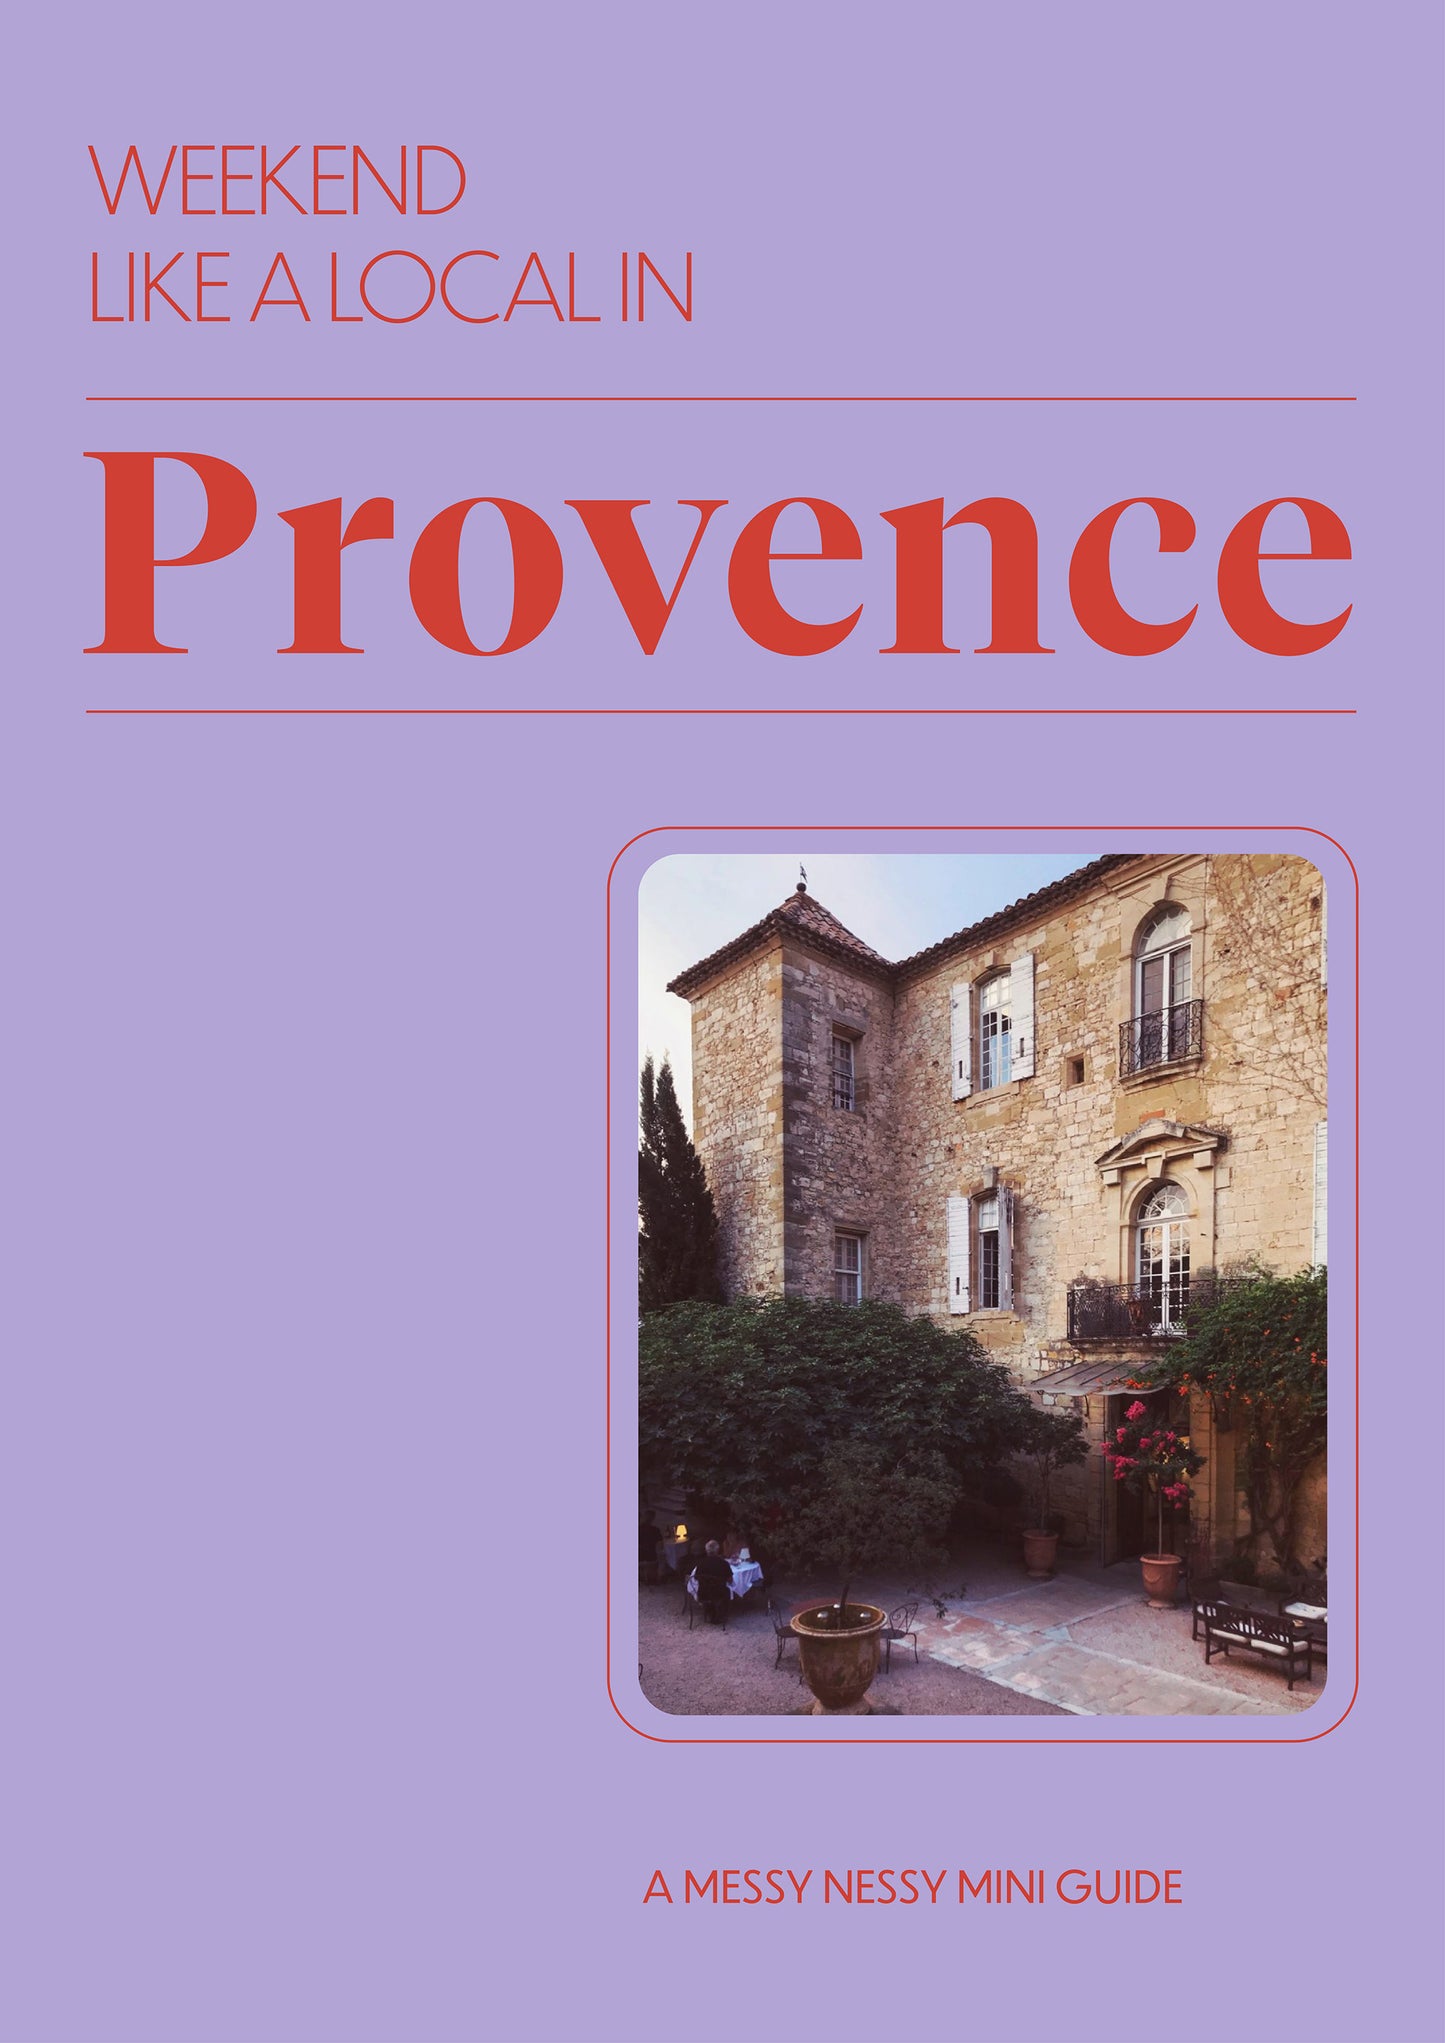 Weekend Like a Local in Provence